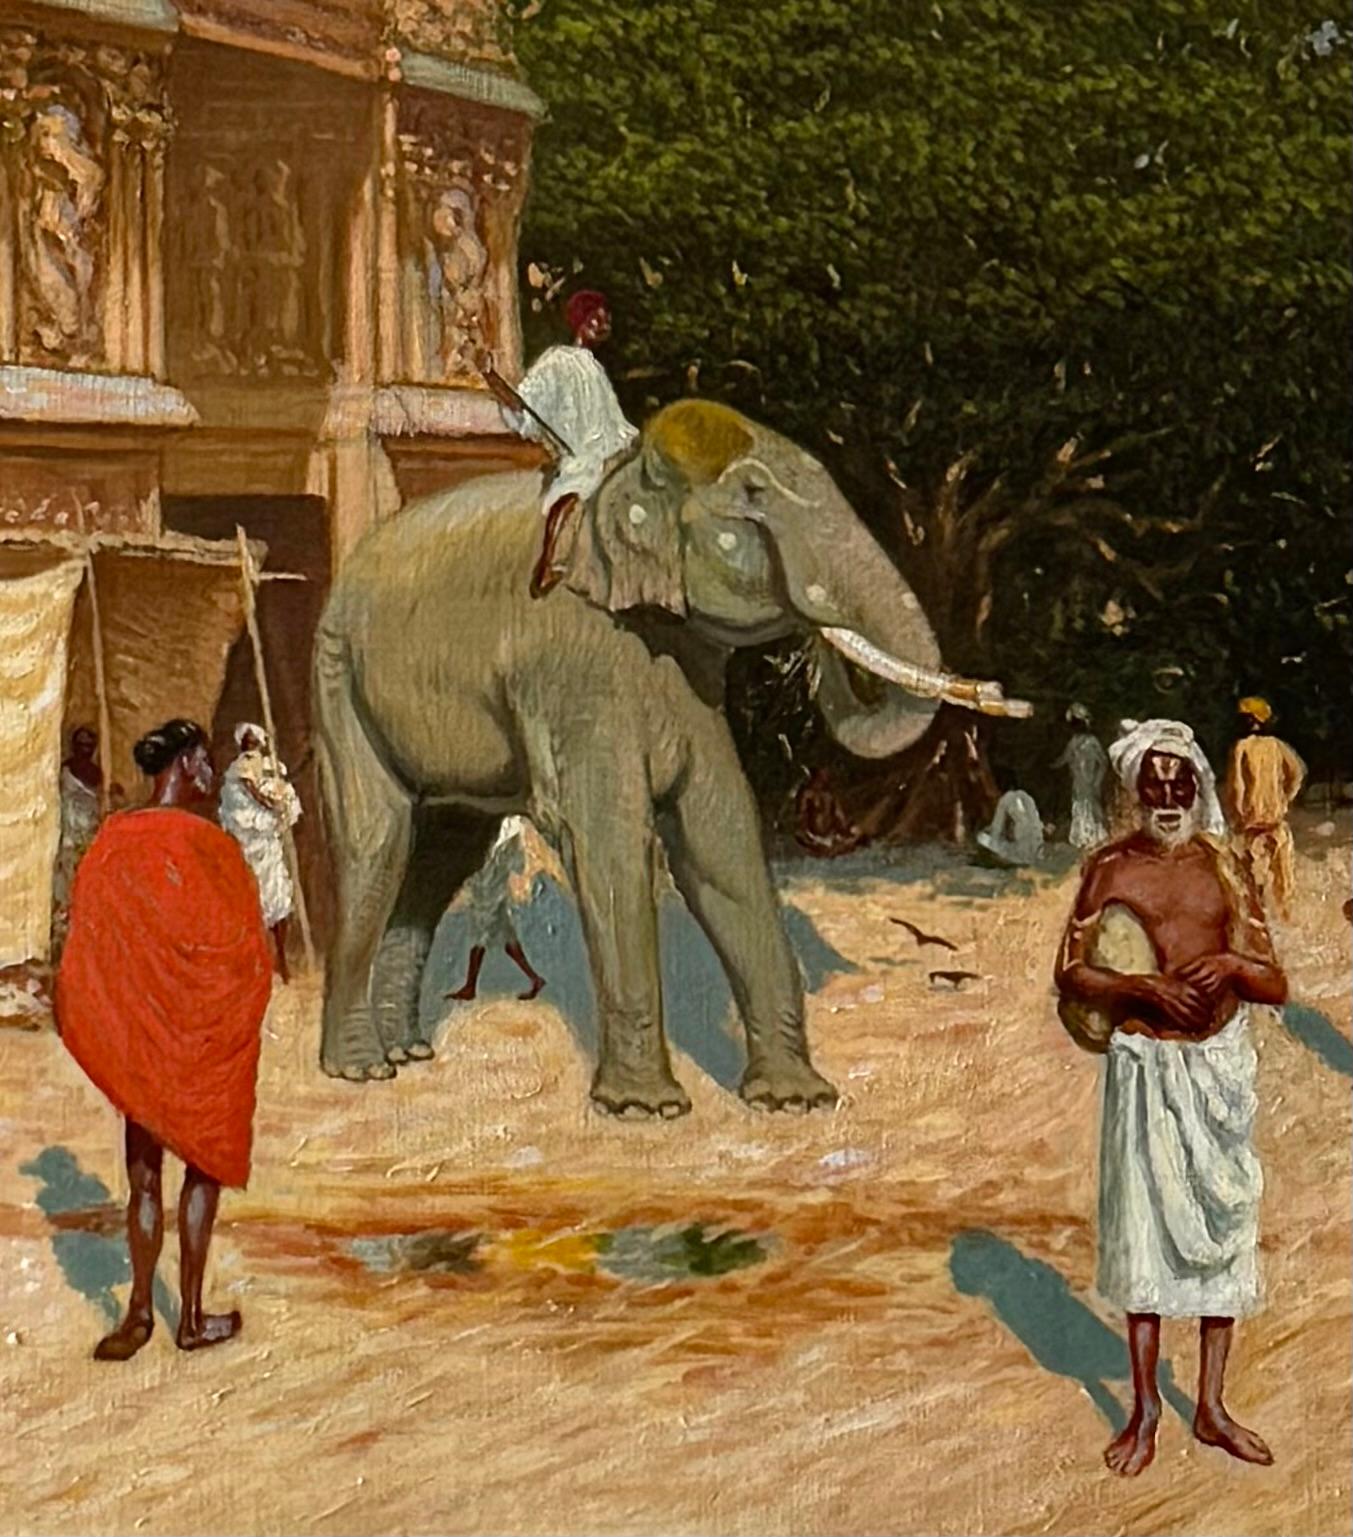 Meenakshi Temple Hindu Priest & Sacred Elephant Madurai Tamil India 1913 o/c - Other Art Style Painting by Andre Chéronnet Champollion